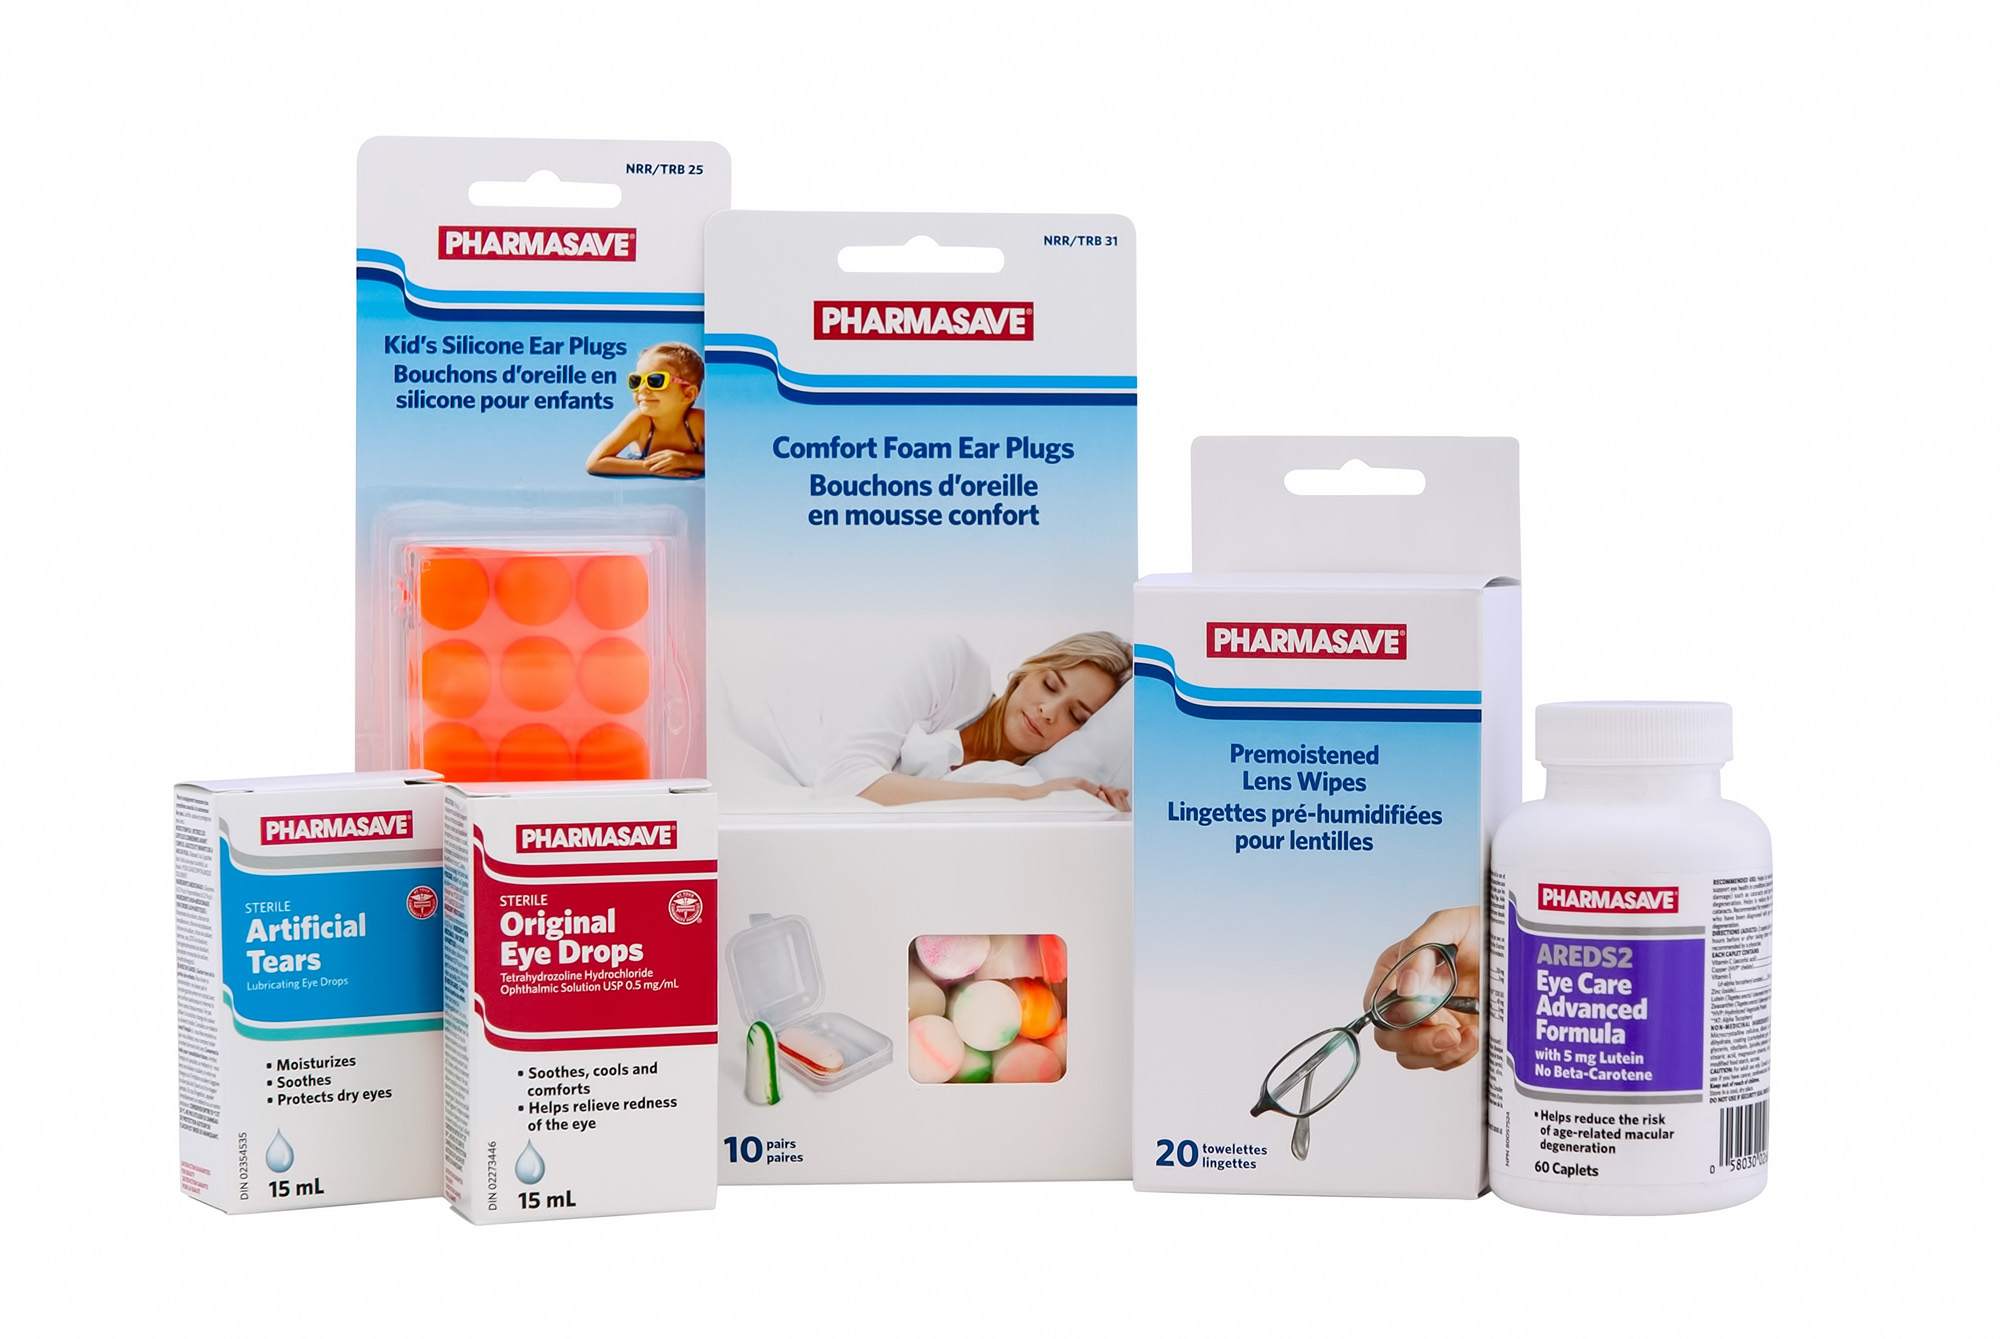 Pharmasave Brand eye and ear care products.